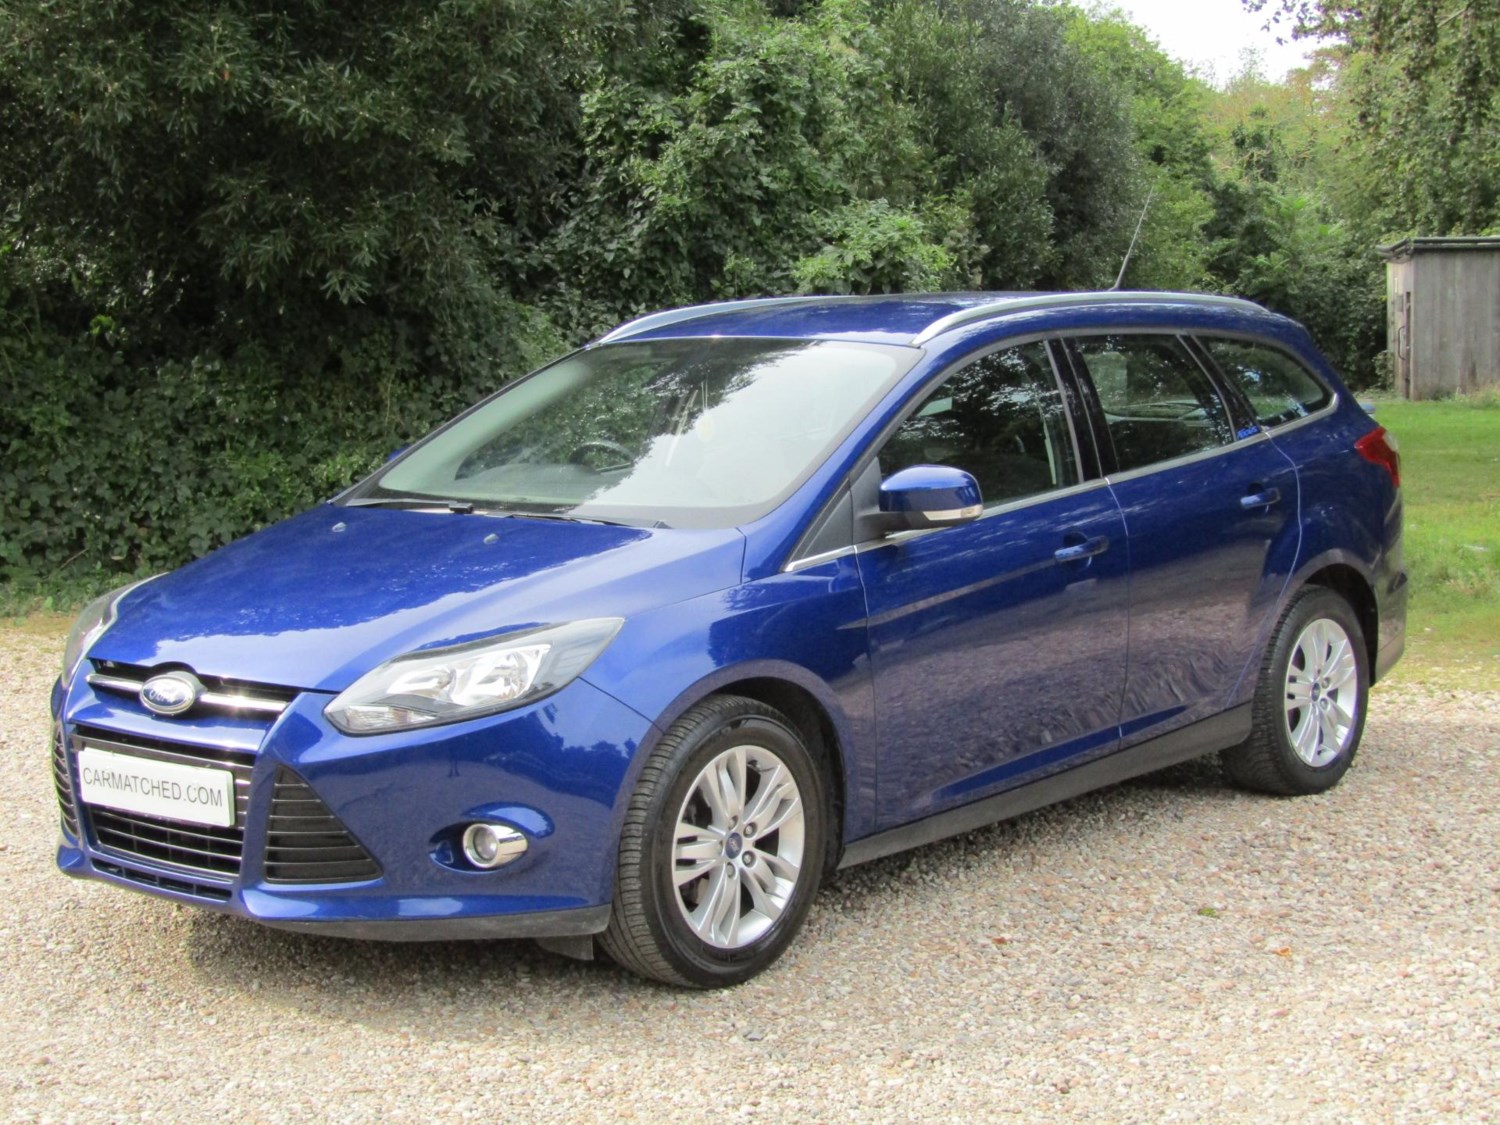 2014 (14) Ford Focus 1.6 TDCi 115 Titanium Navigator 5dr For Sale In Broadstairs, Kent